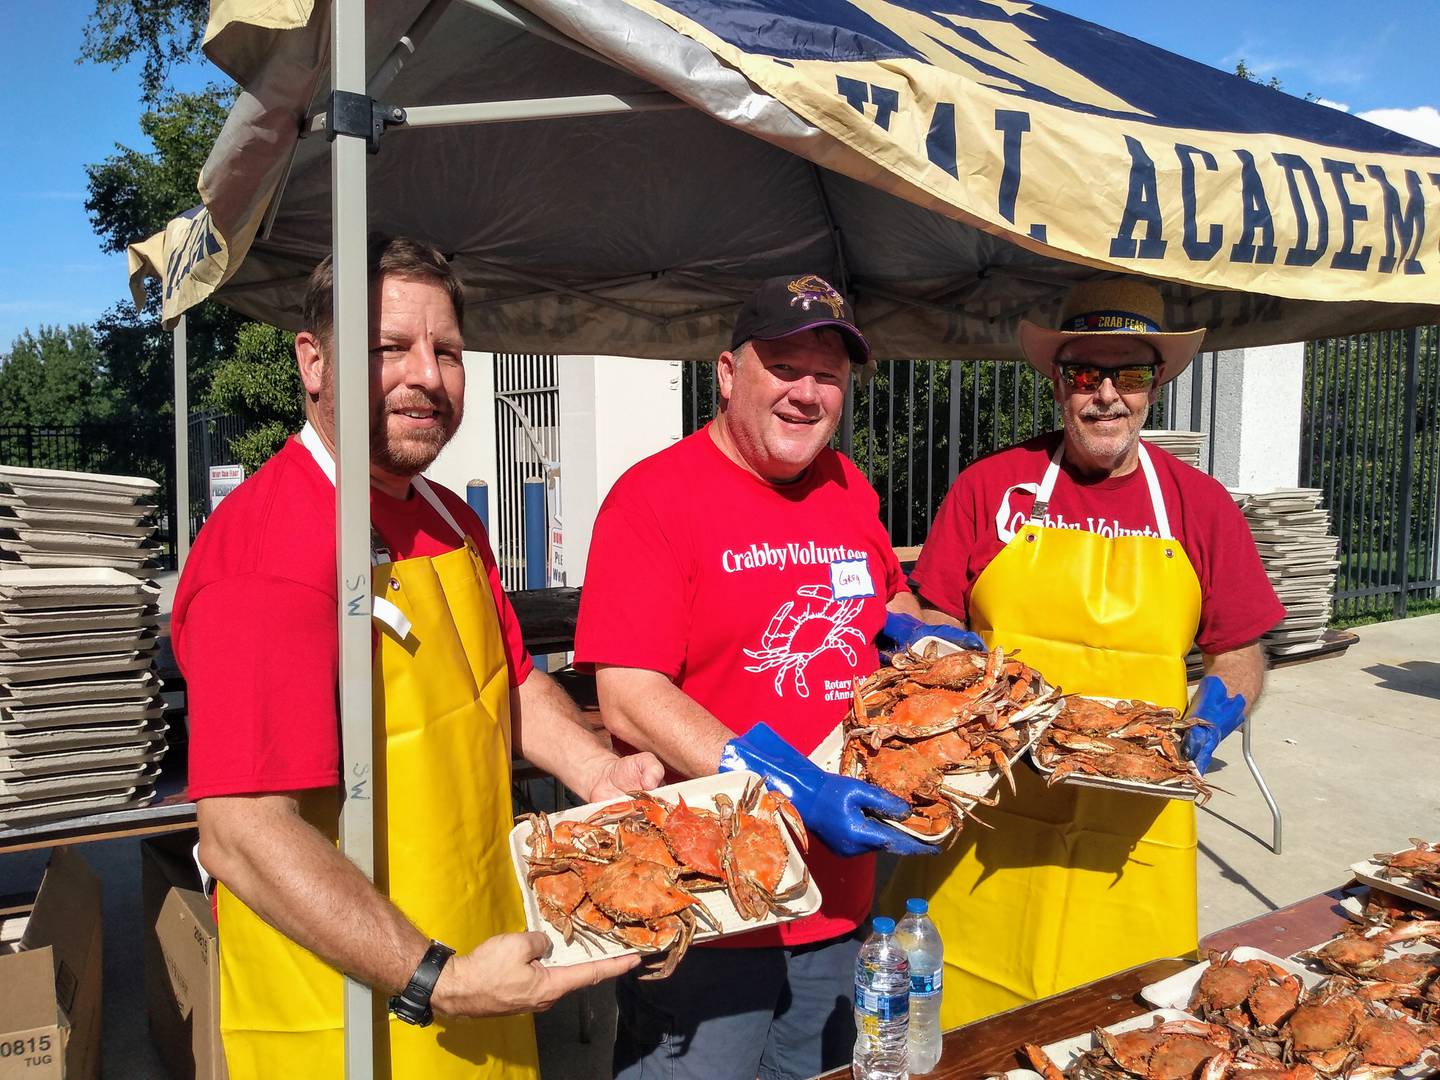 Annapolis Rotary Club volunteers run the annual crab feast each year, an event billed as the largest in the world.